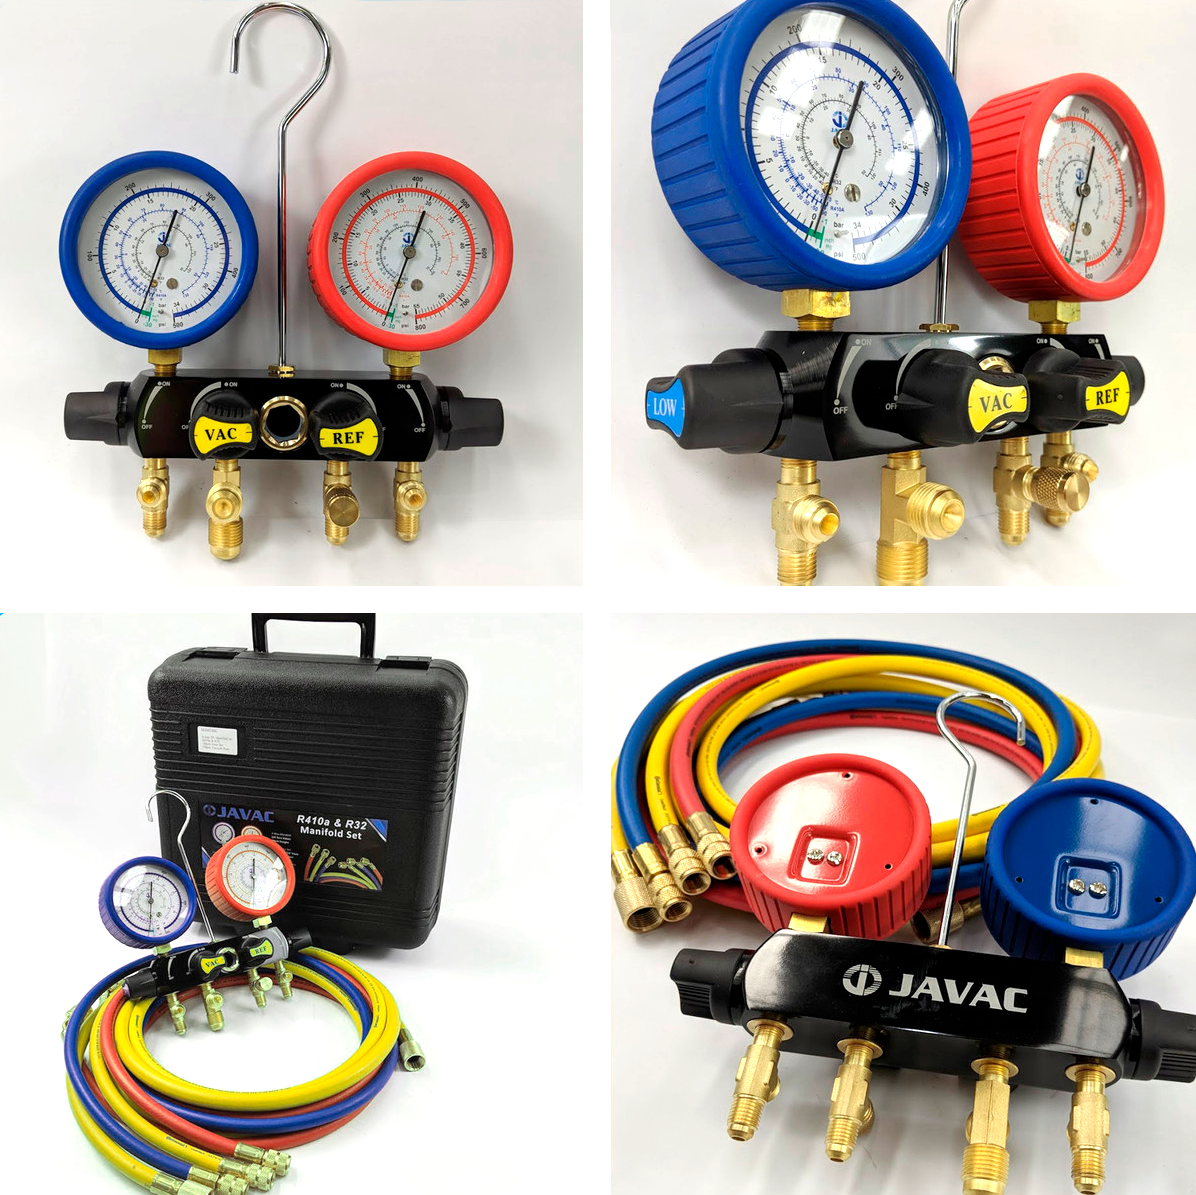 Showing the various components of the JAVAC 4-VALVE Refrigerant Manifold Set (MB4E86C)